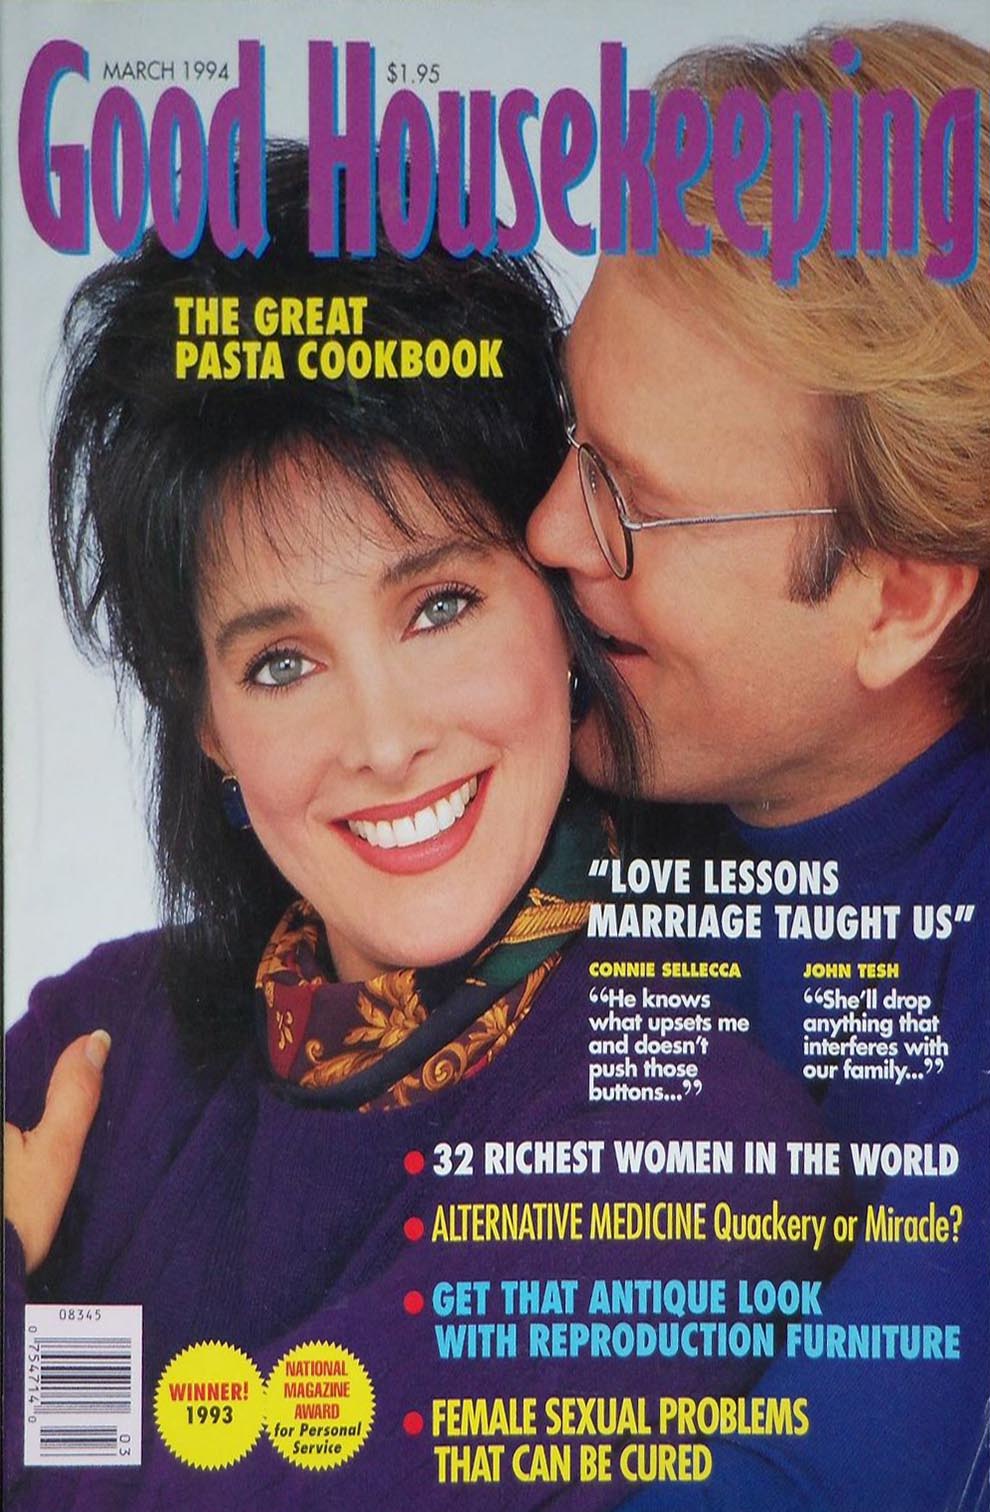 Good Housekeeping March 1994 magazine back issue Good Housekeeping magizine back copy Good Housekeeping March 1994 American womens magazine Back Issue Published by Hearst Publishing Corporation. Covergirl Connie Sellecca & John Tesh.